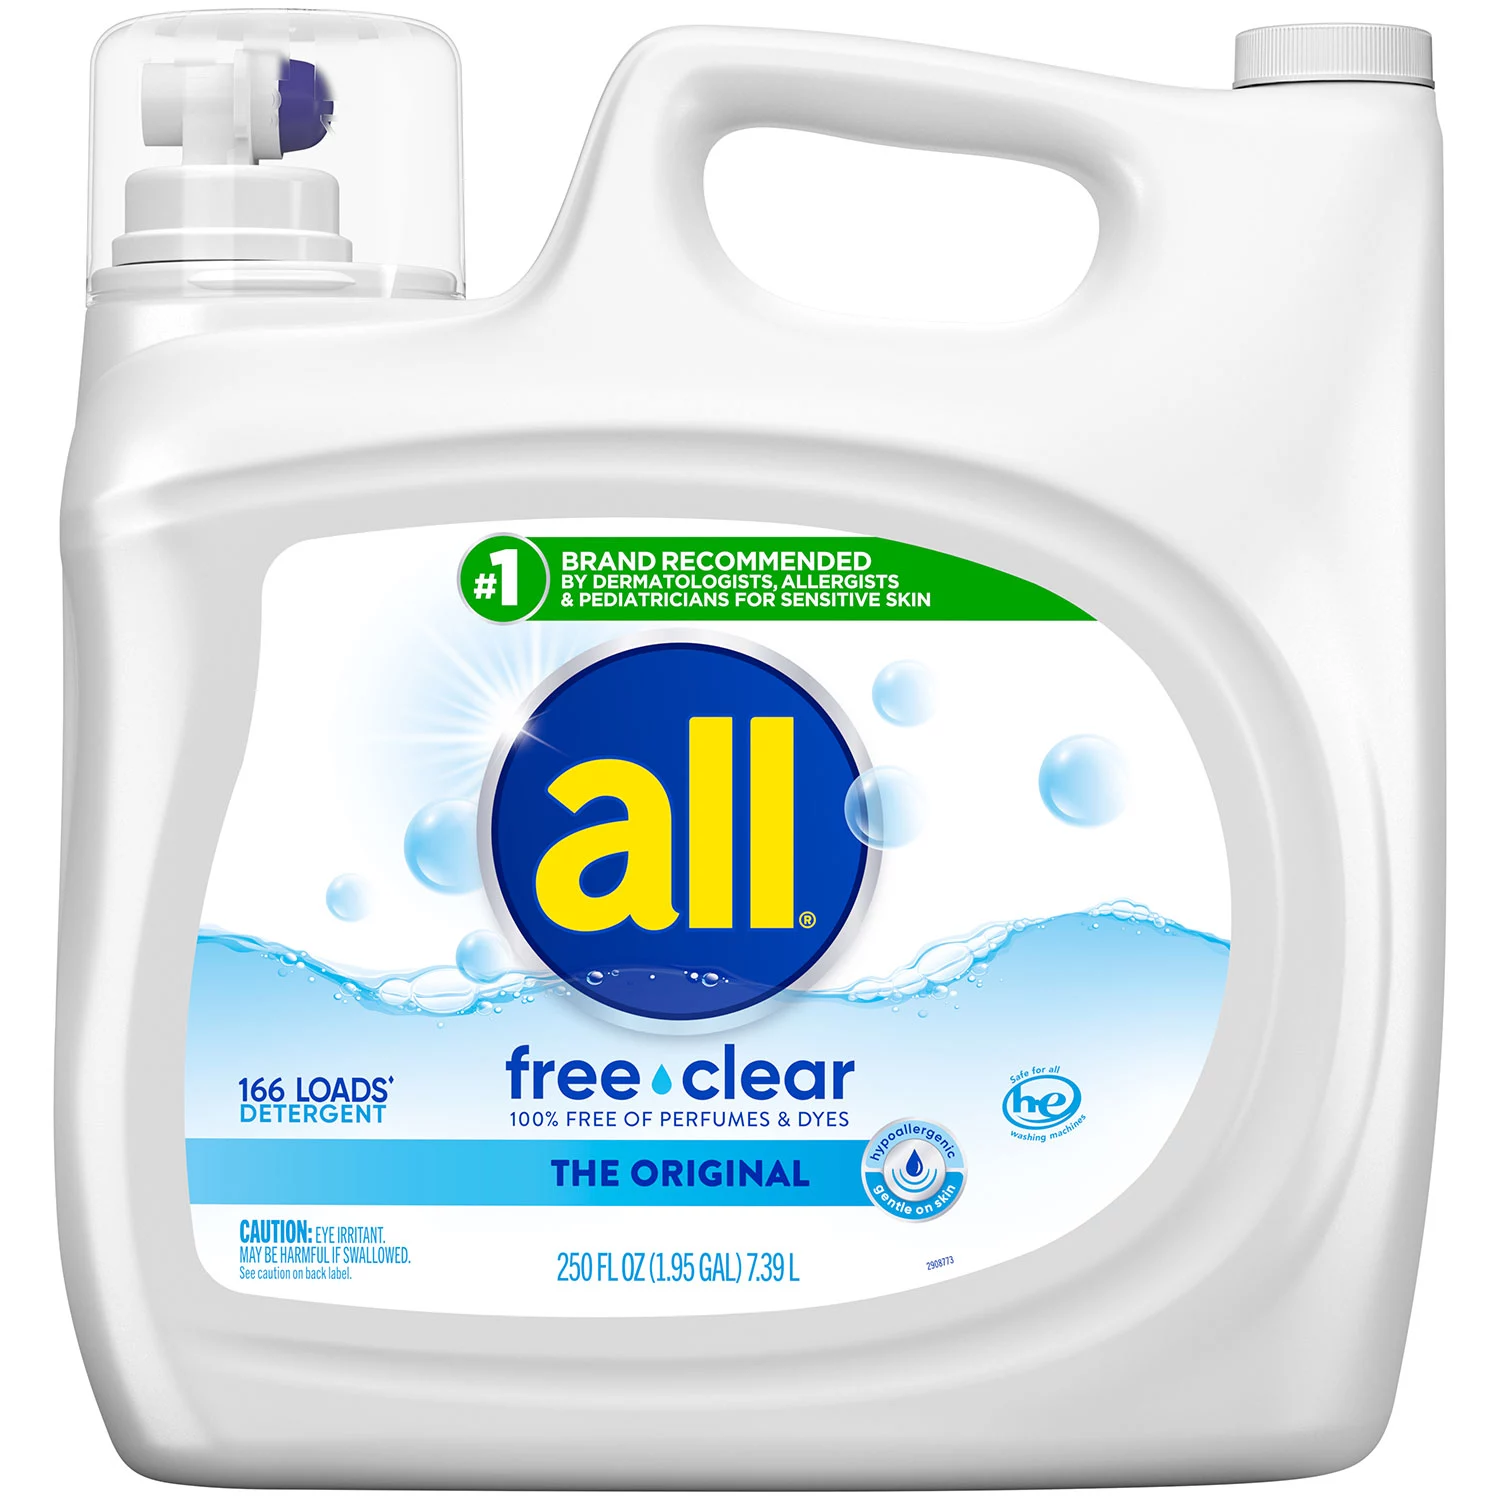 all Liquid Laundry Detergent Free Clear for Sensitive Skin - 250 oz. -166 loads